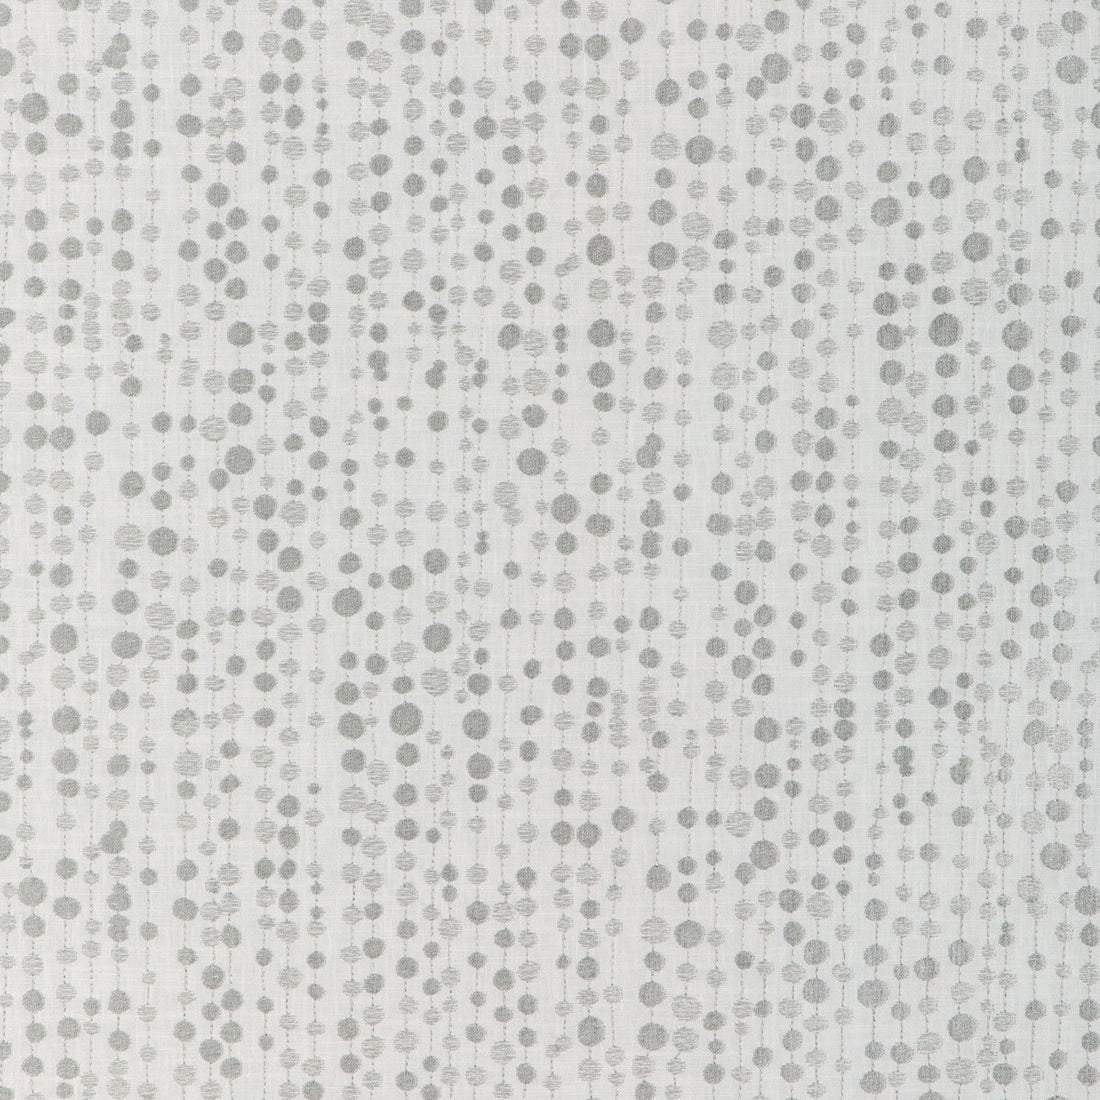 String Dot fabric in pewter color - pattern 36953.1101.0 - by Kravet Basics in the Mid-Century Modern collection